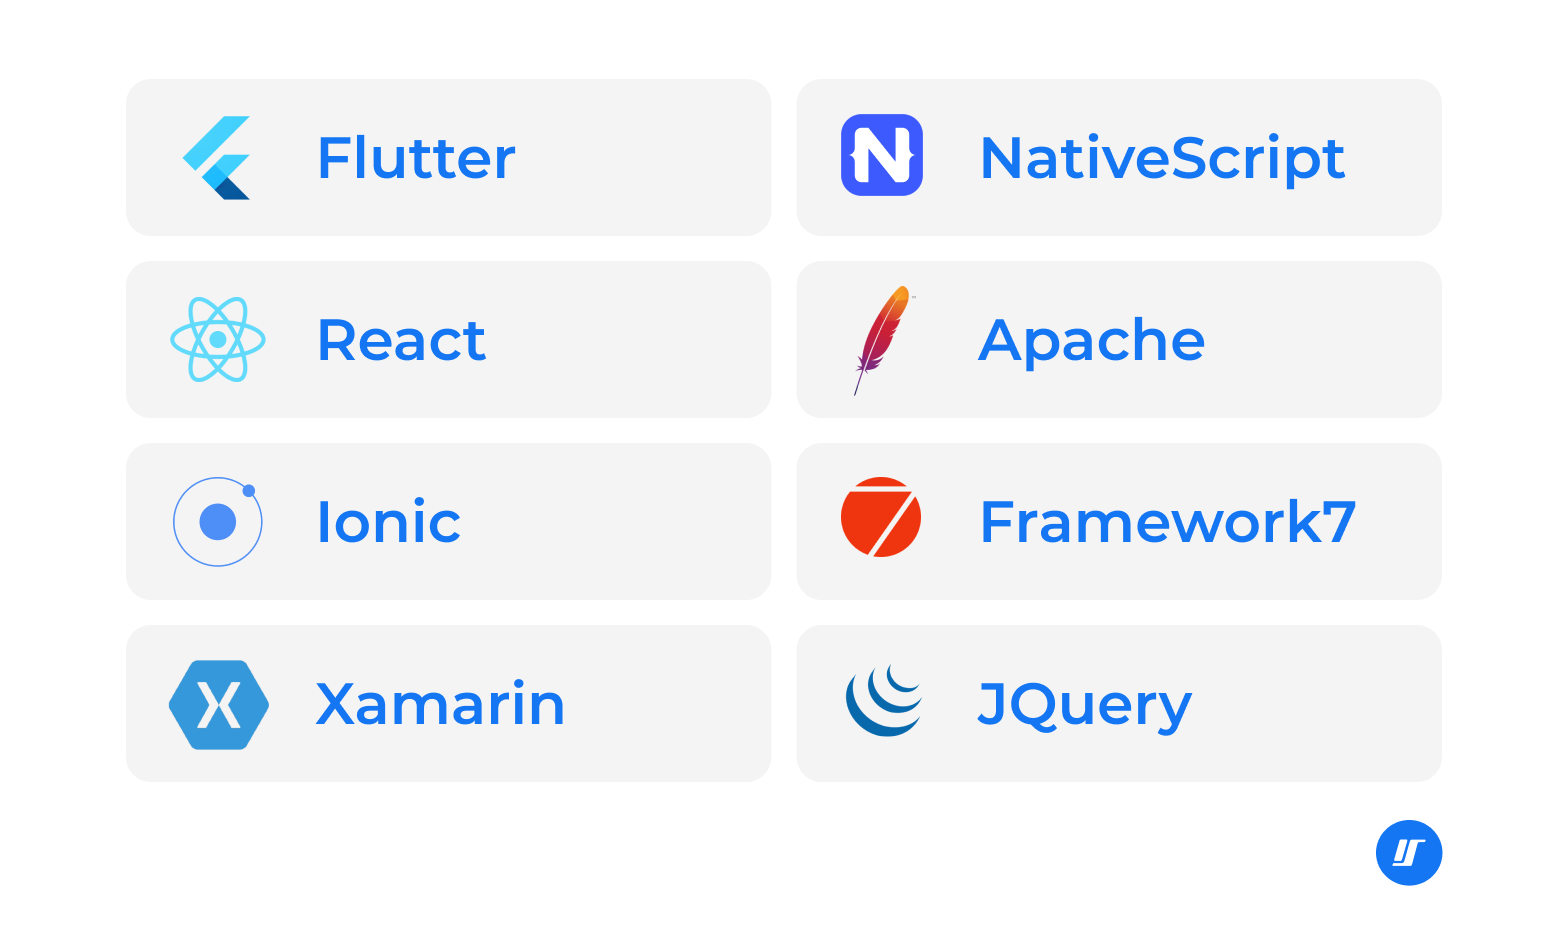 Top 8 android frameworks with logo and name